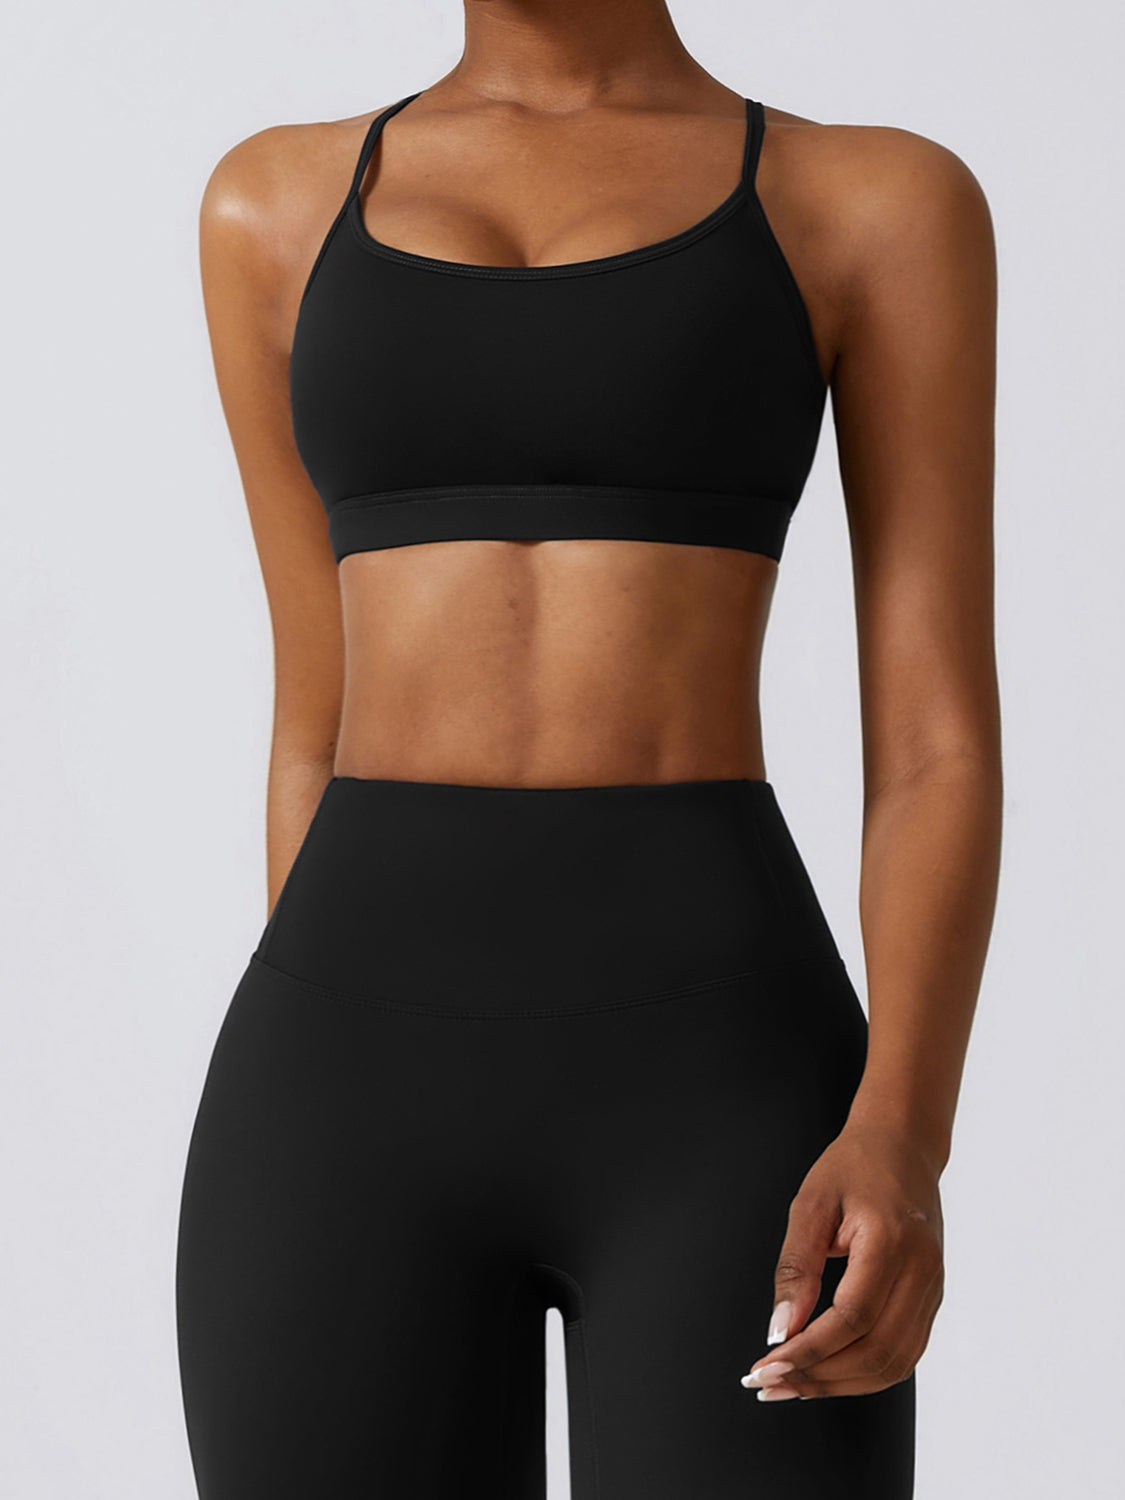 Cropped Sports Tank Top Additional Options Available